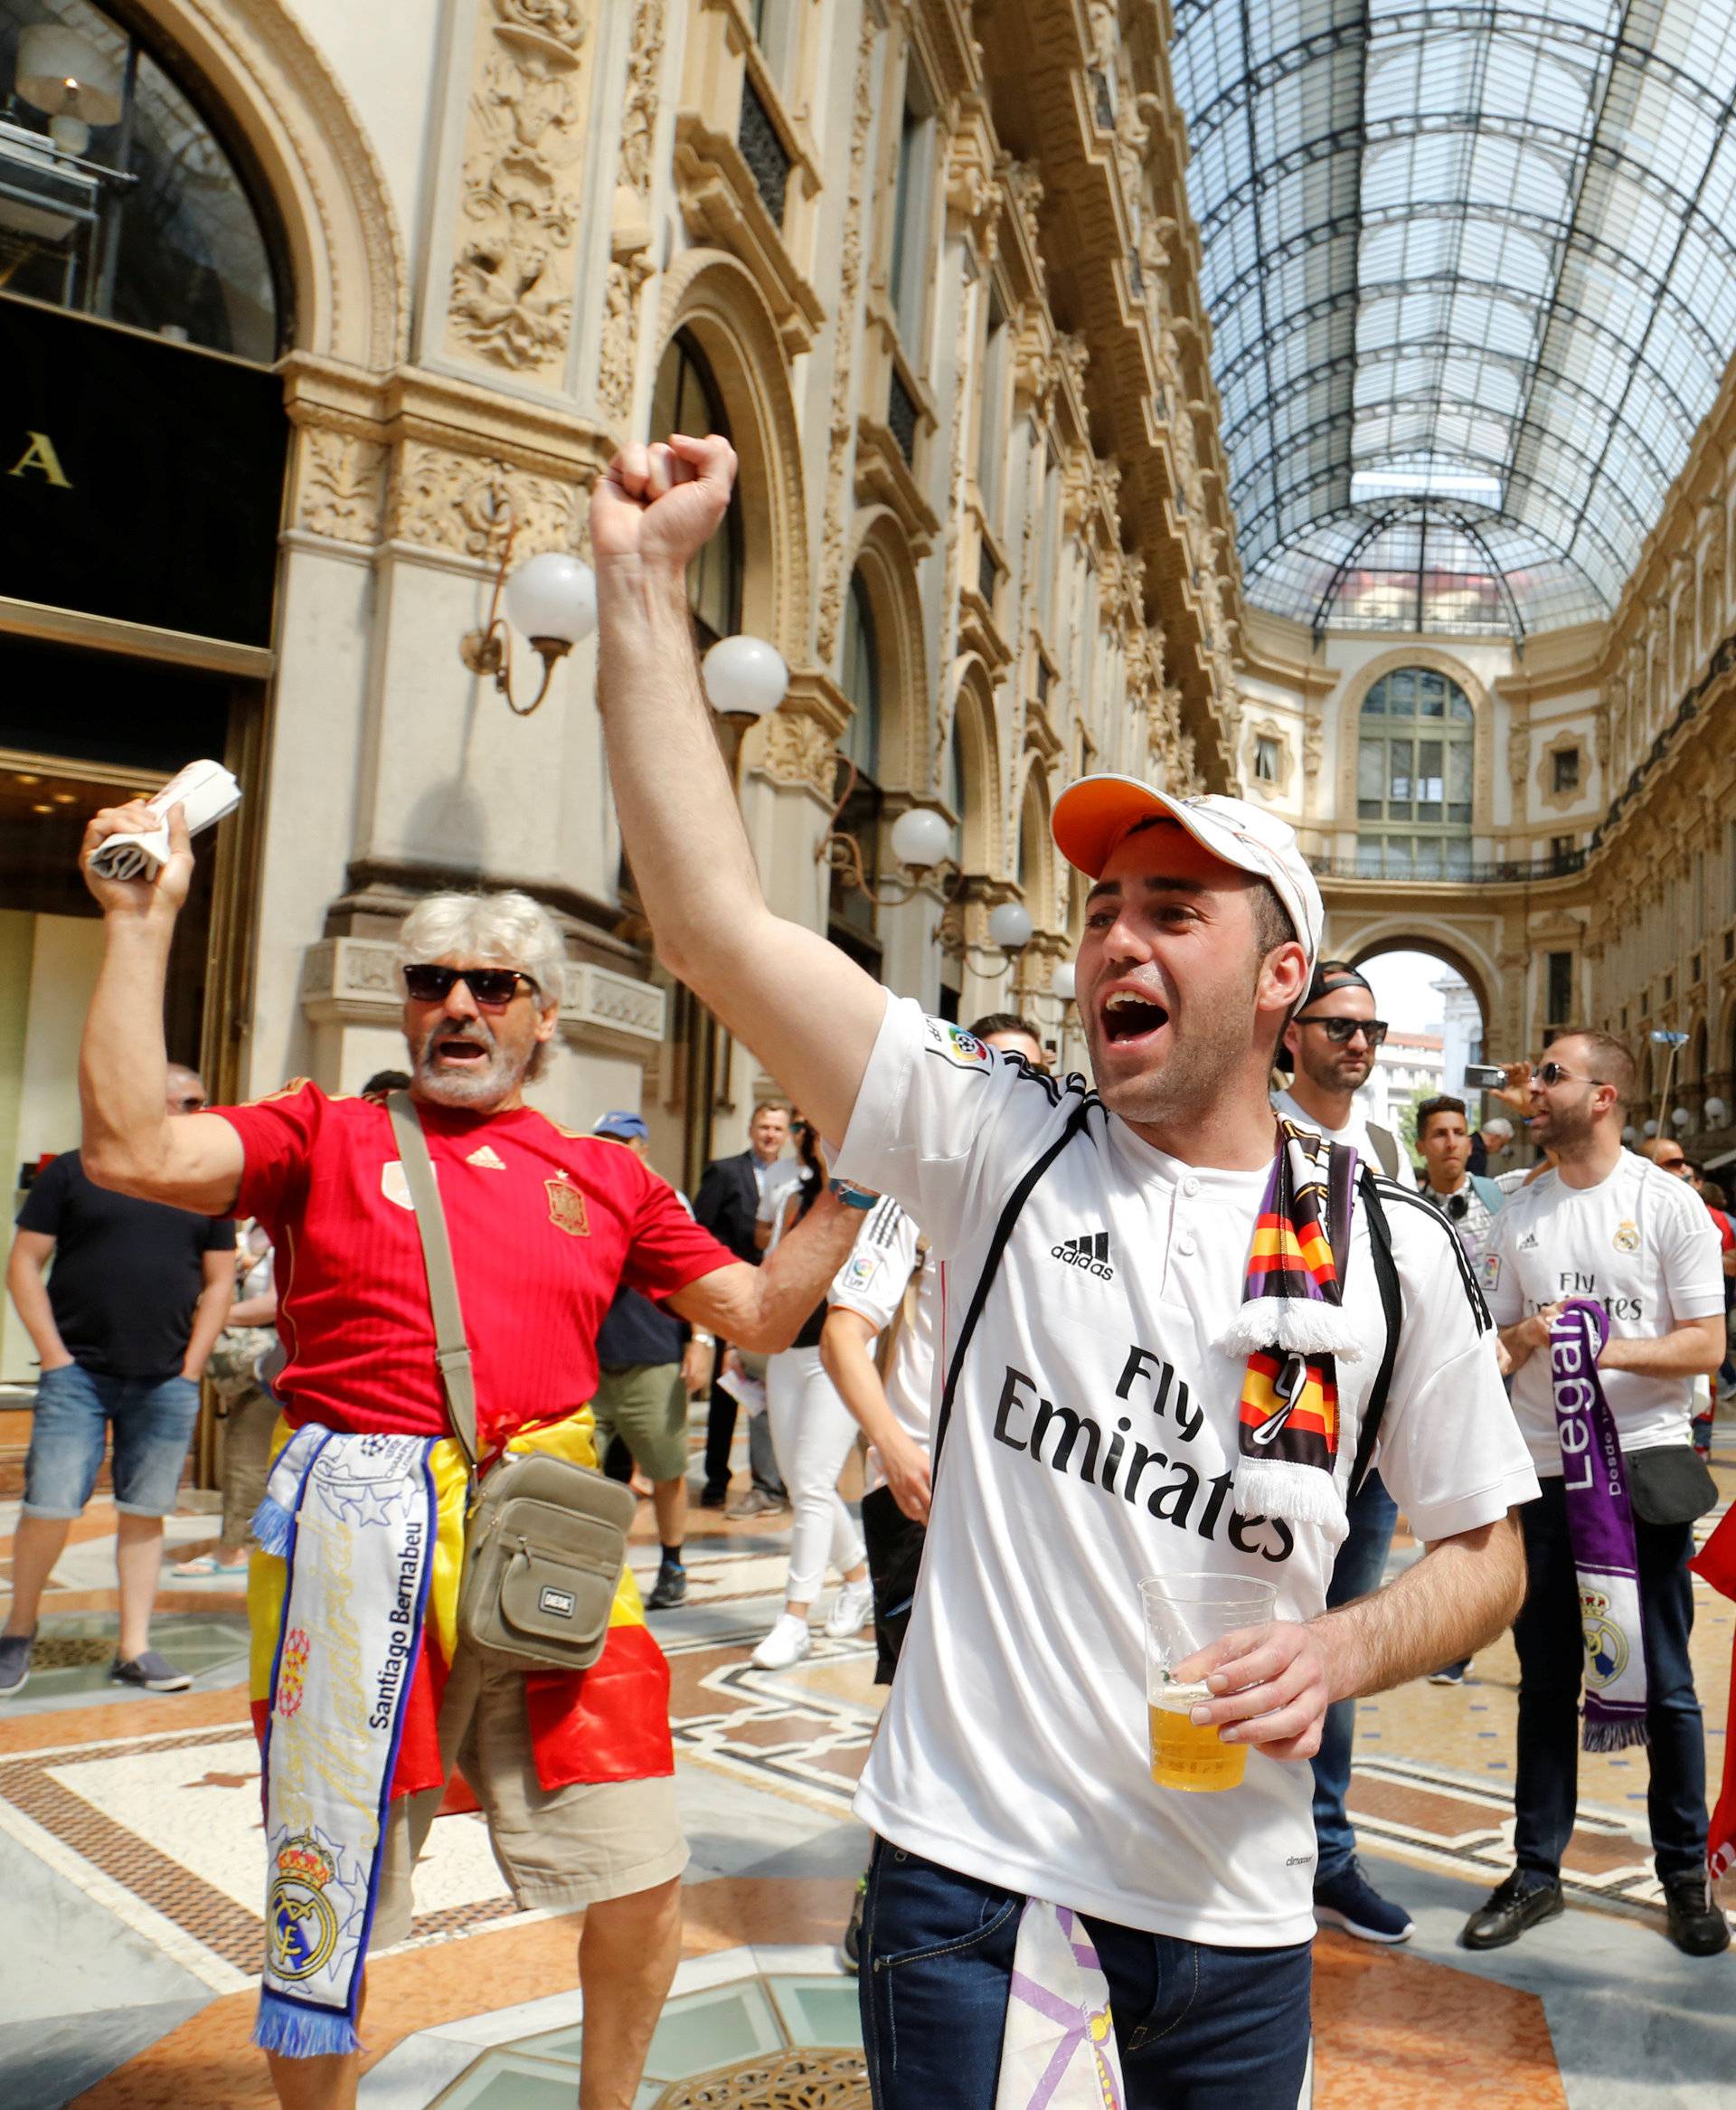 Real Madrid fans shout slogans before the Champions League Final between Real Madrid and Atletico Madrid in Milan